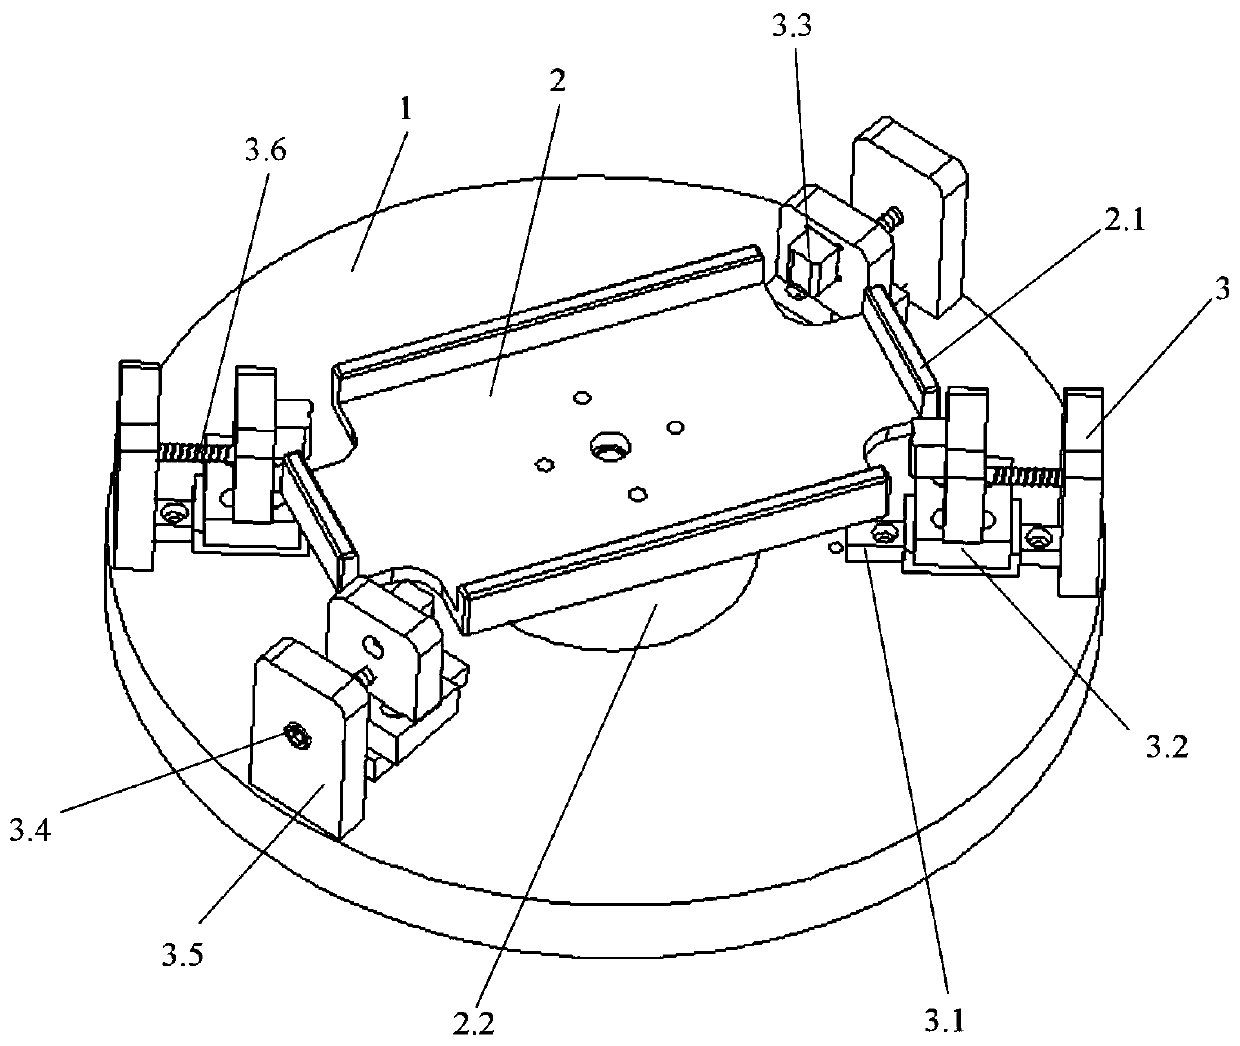 A device for repairing large r-angles